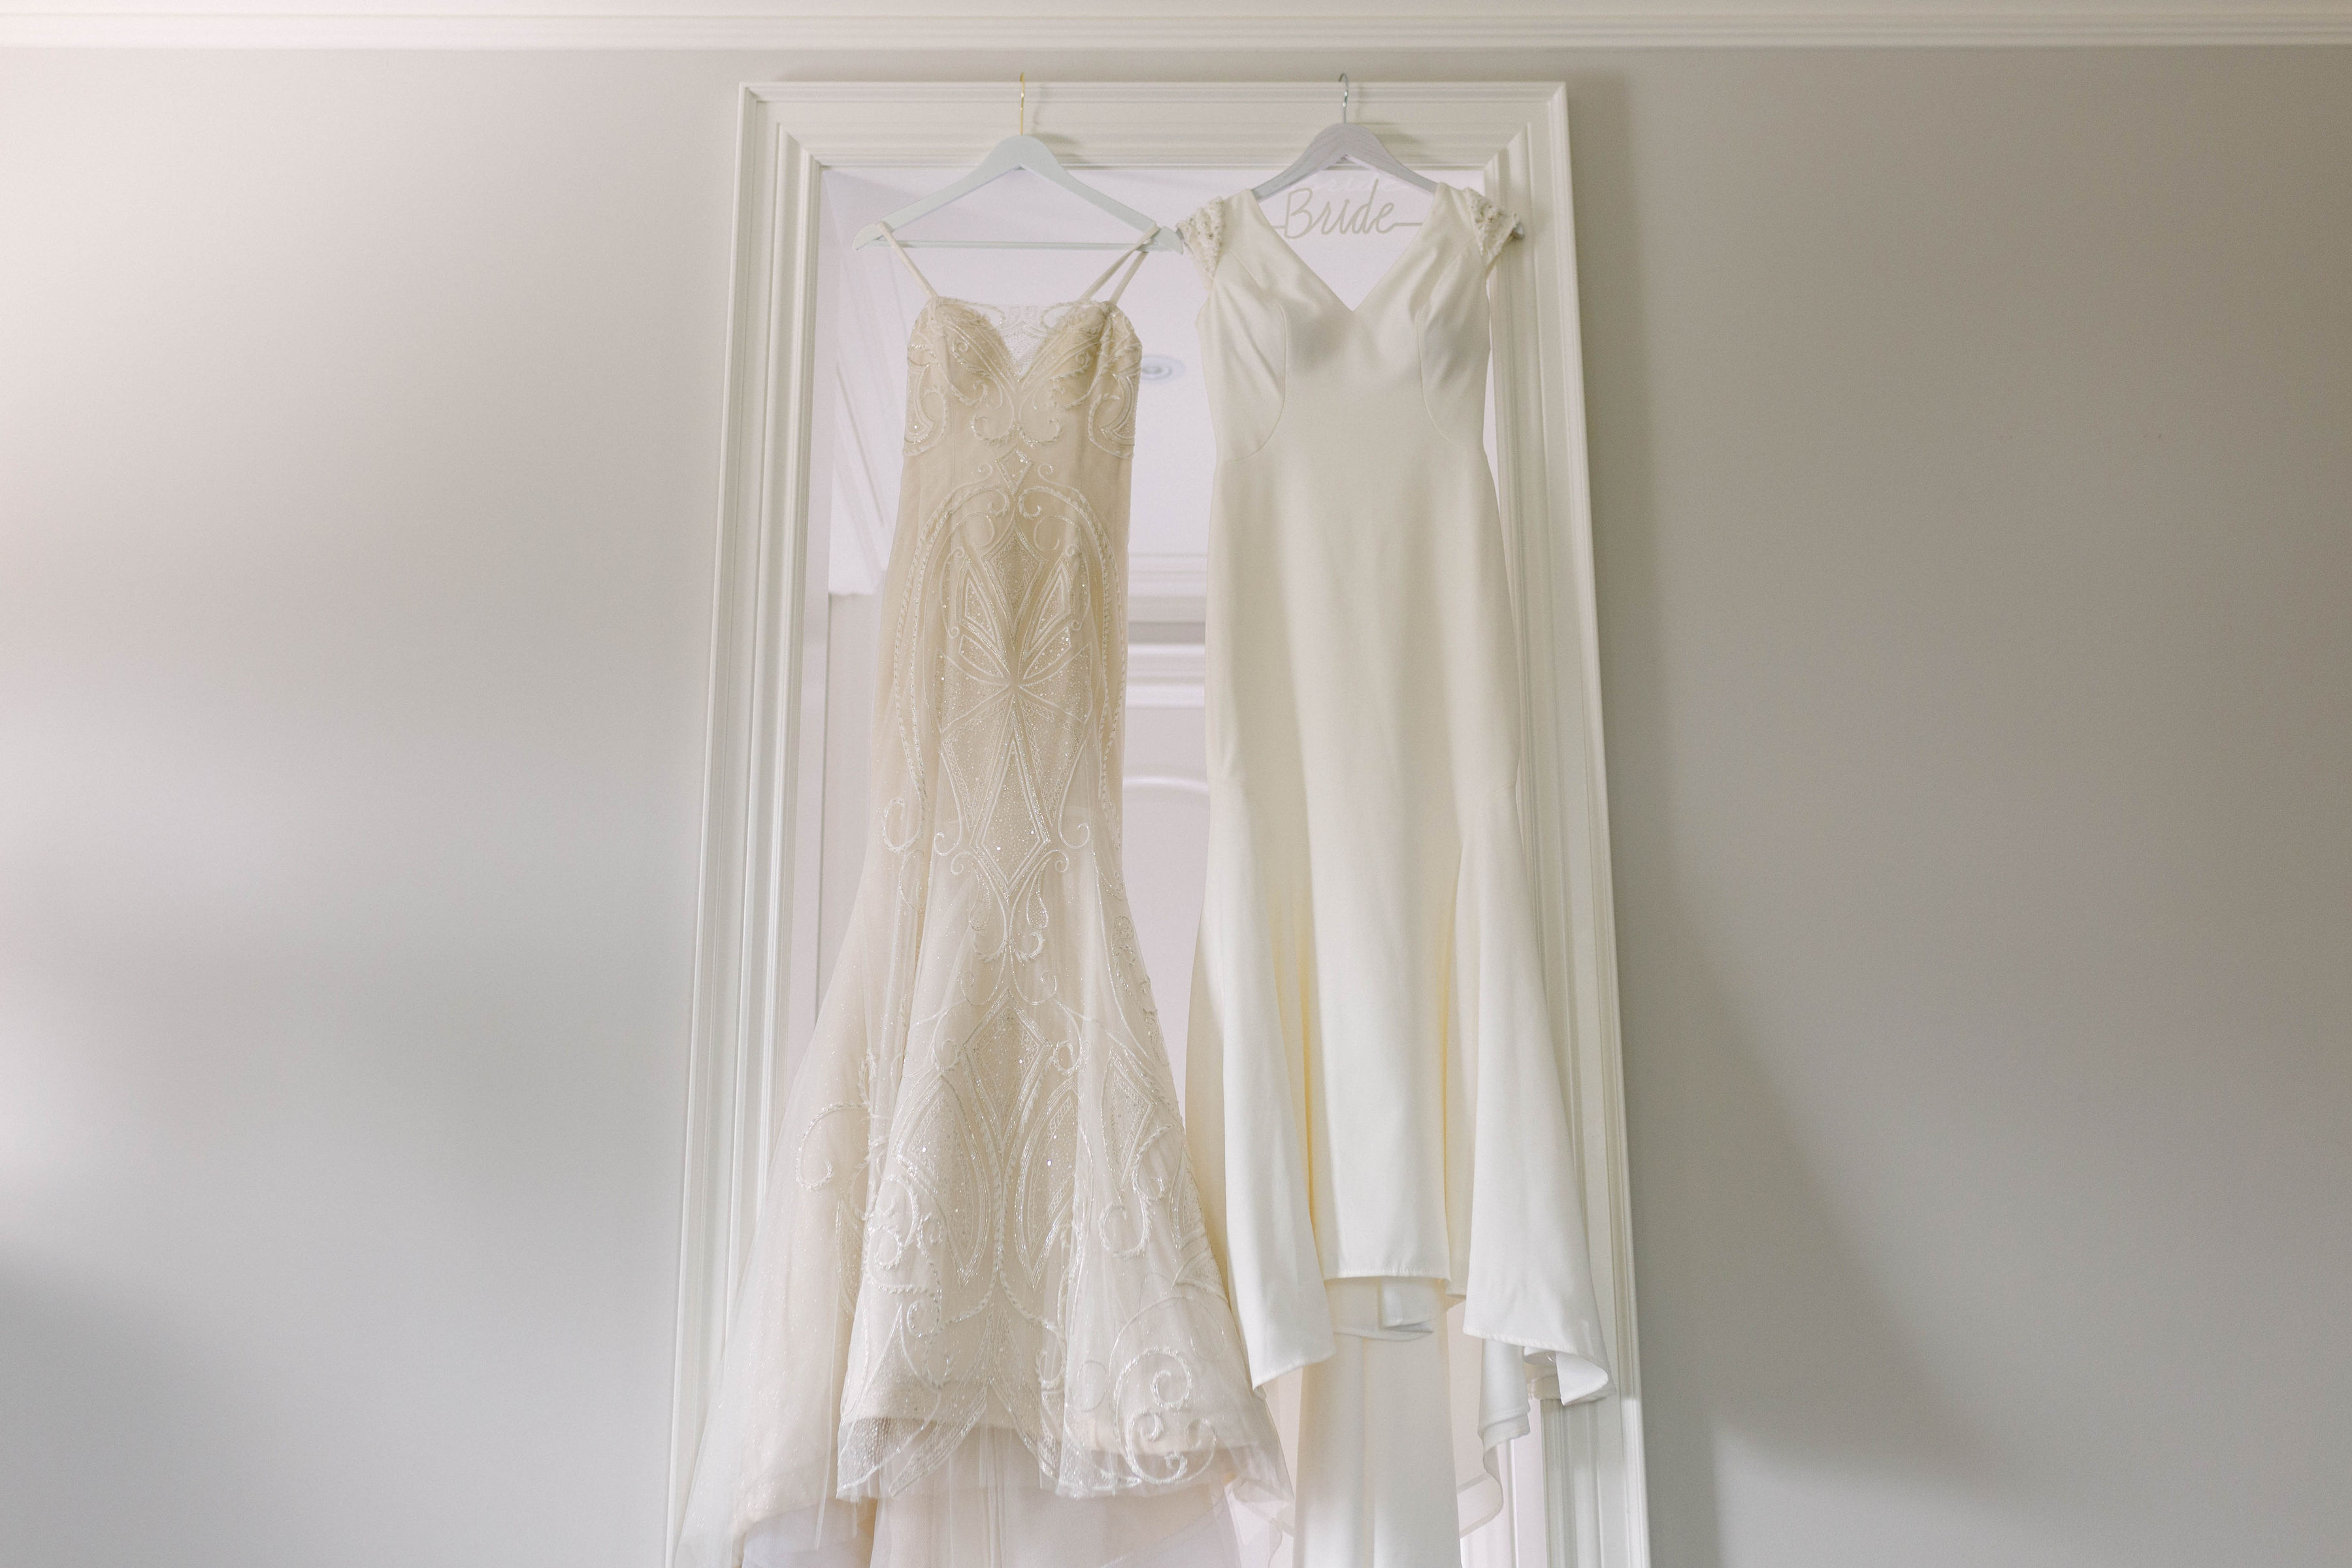 Bride's two dresses hanging in bridal suite